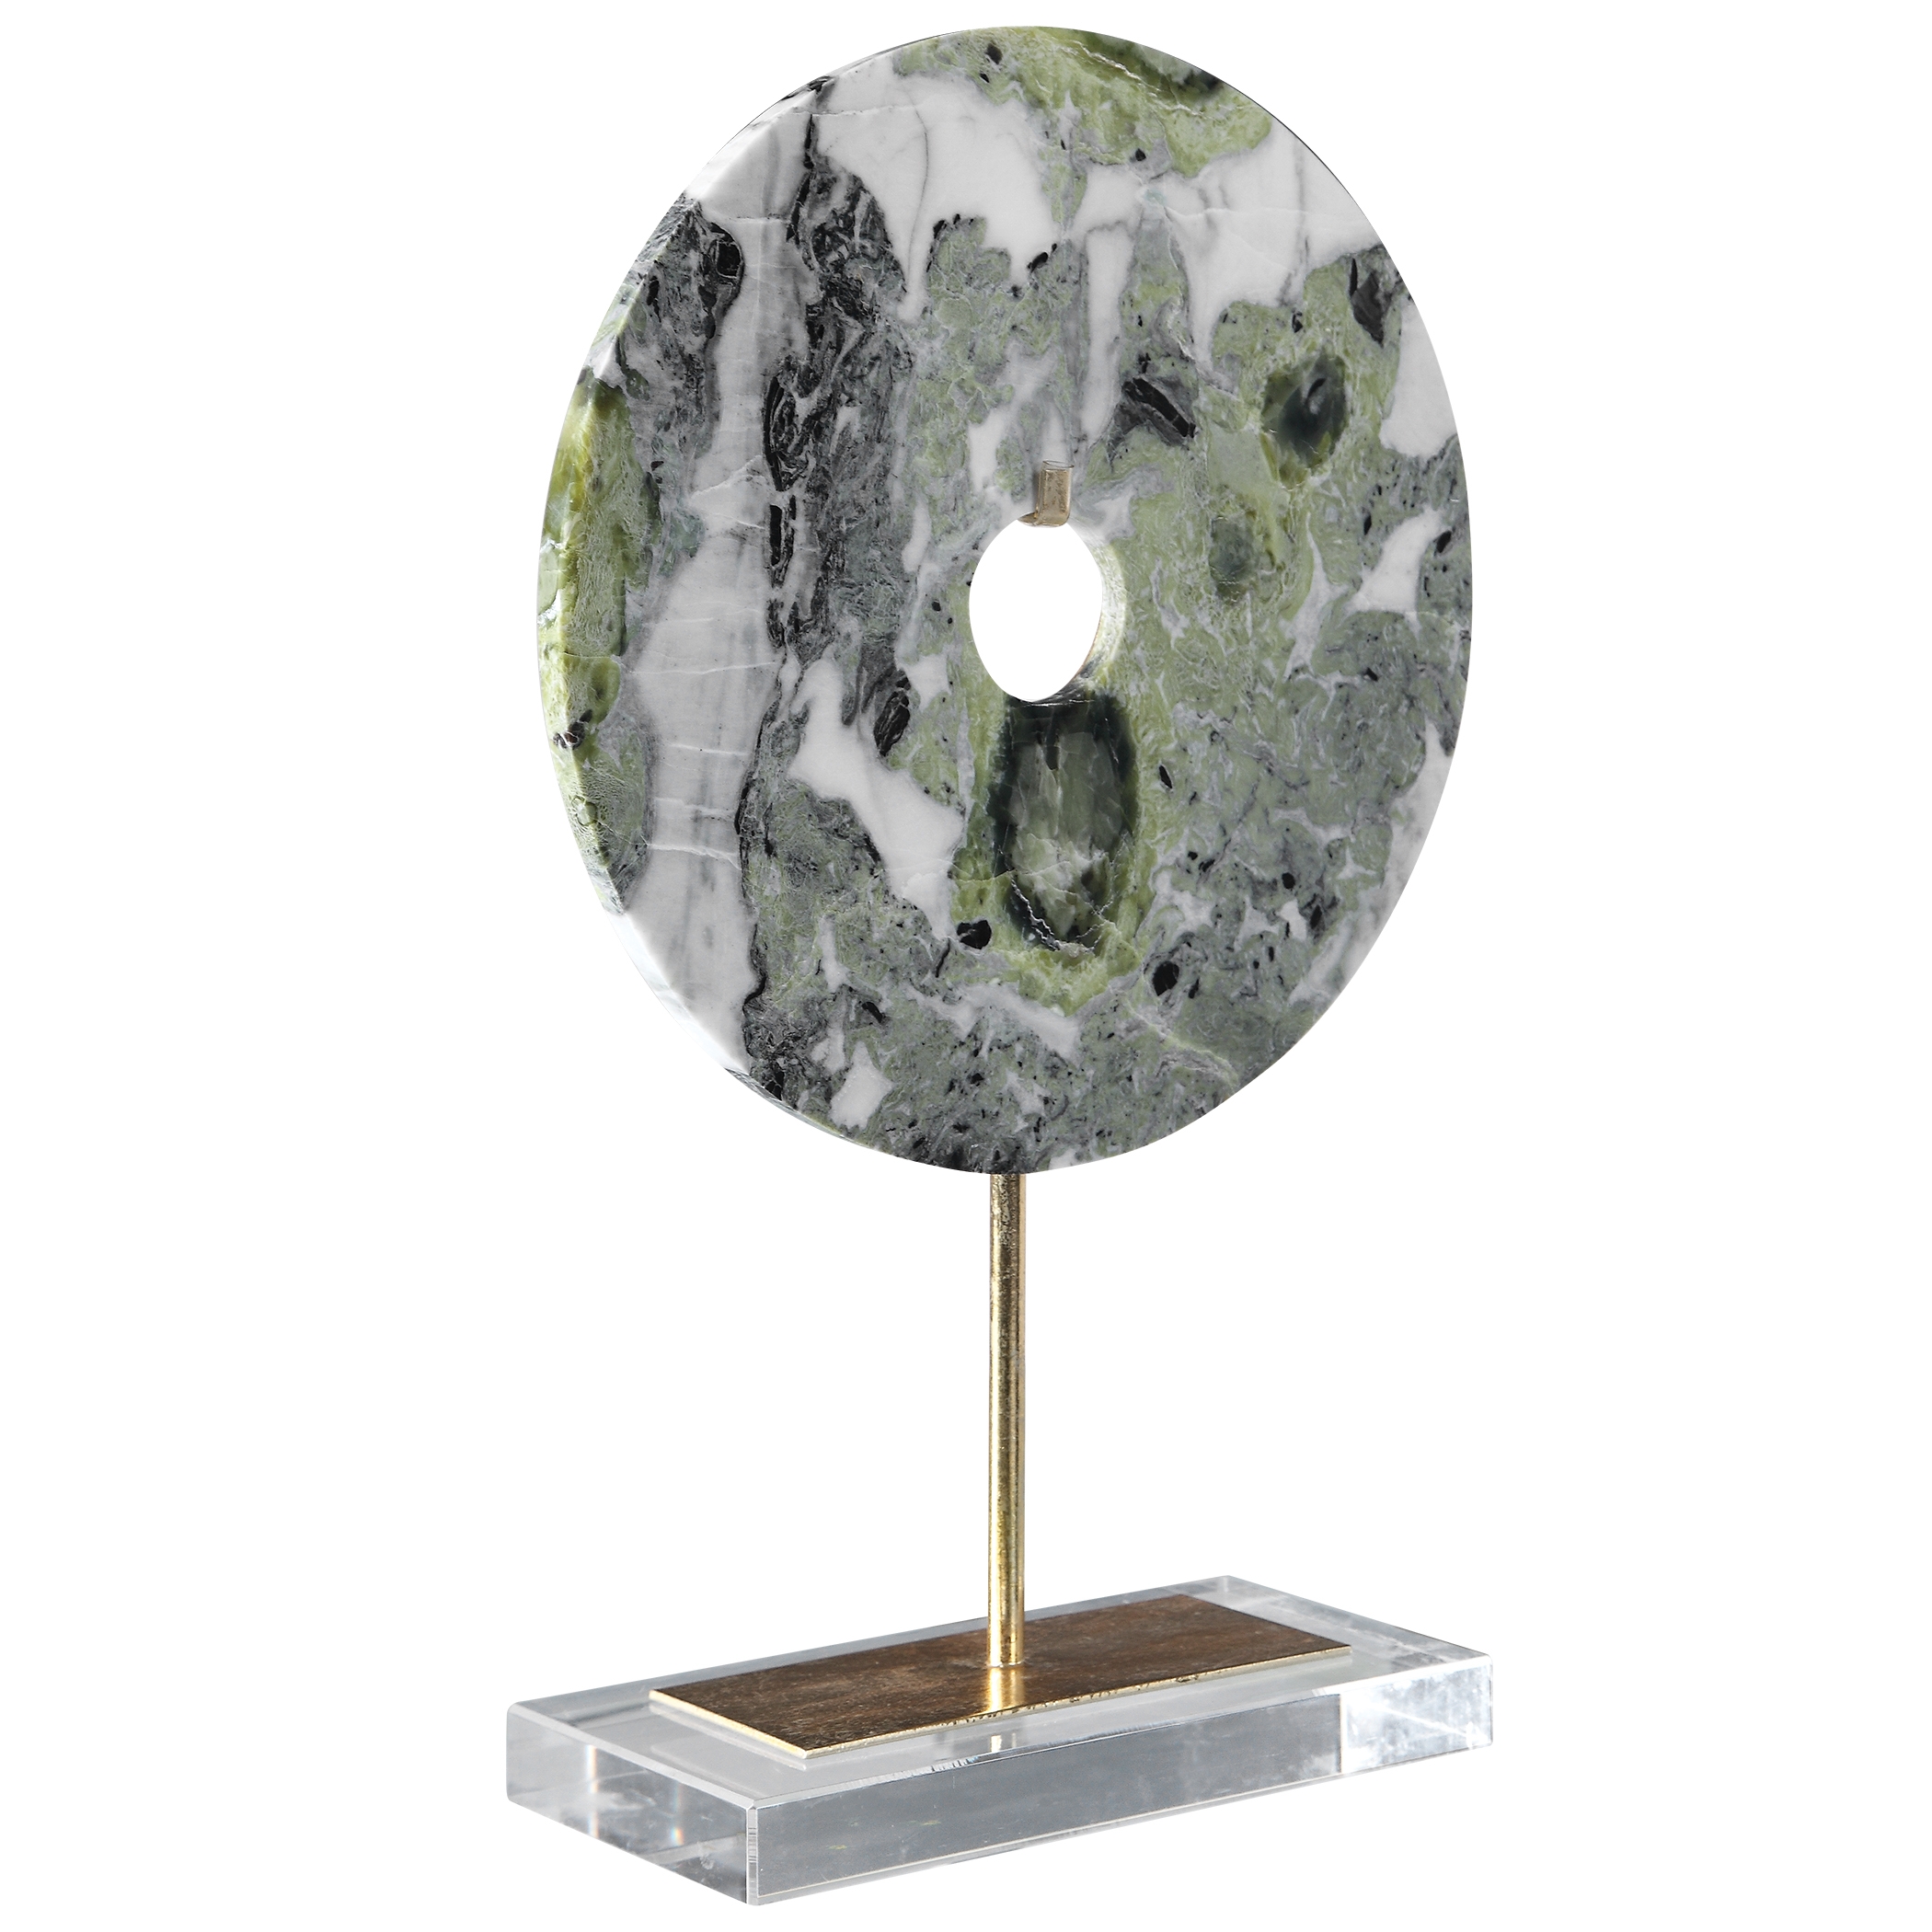 Irelyn Marble Disk Sculpture - Image 2